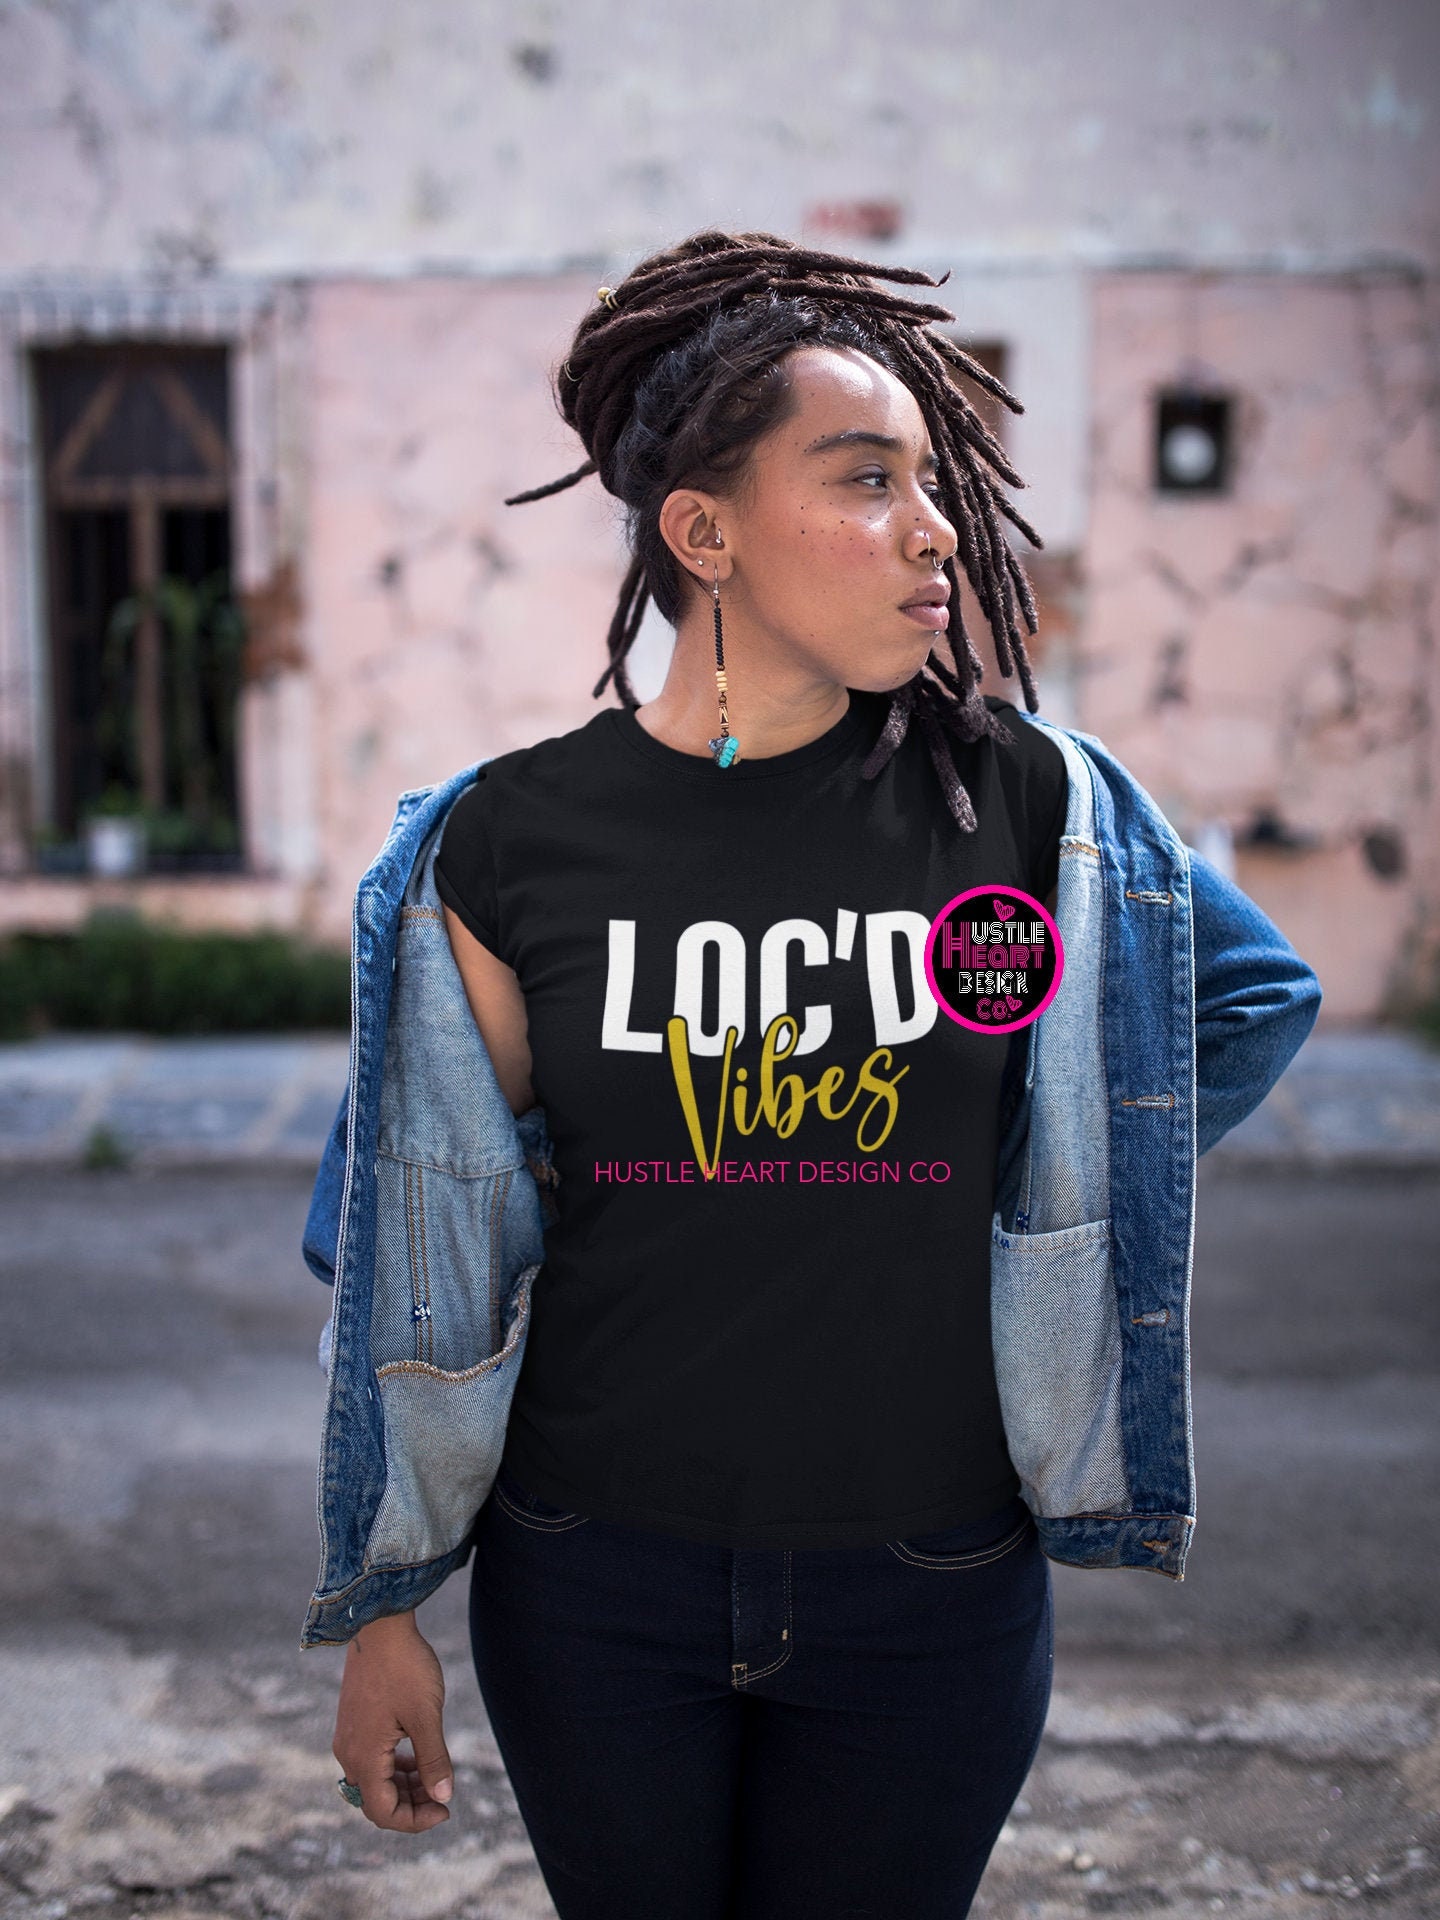 Download Locs Svg It's The Locs for Me Svg Loc'd Vibes Svg | Etsy